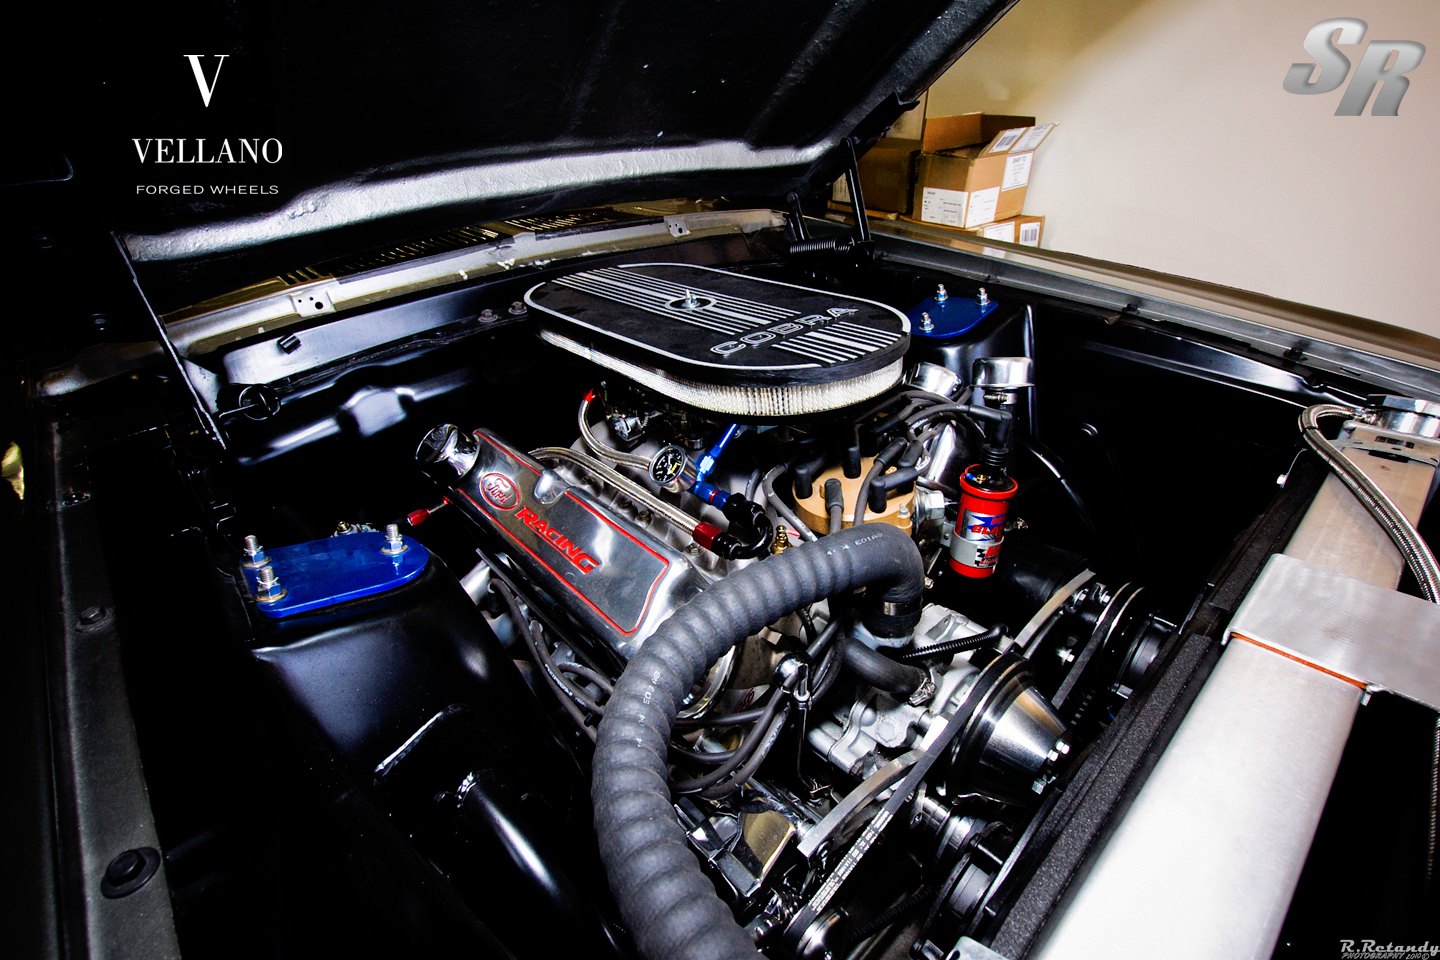 Ford Mustang Cobra Engine - Photo by Vellano